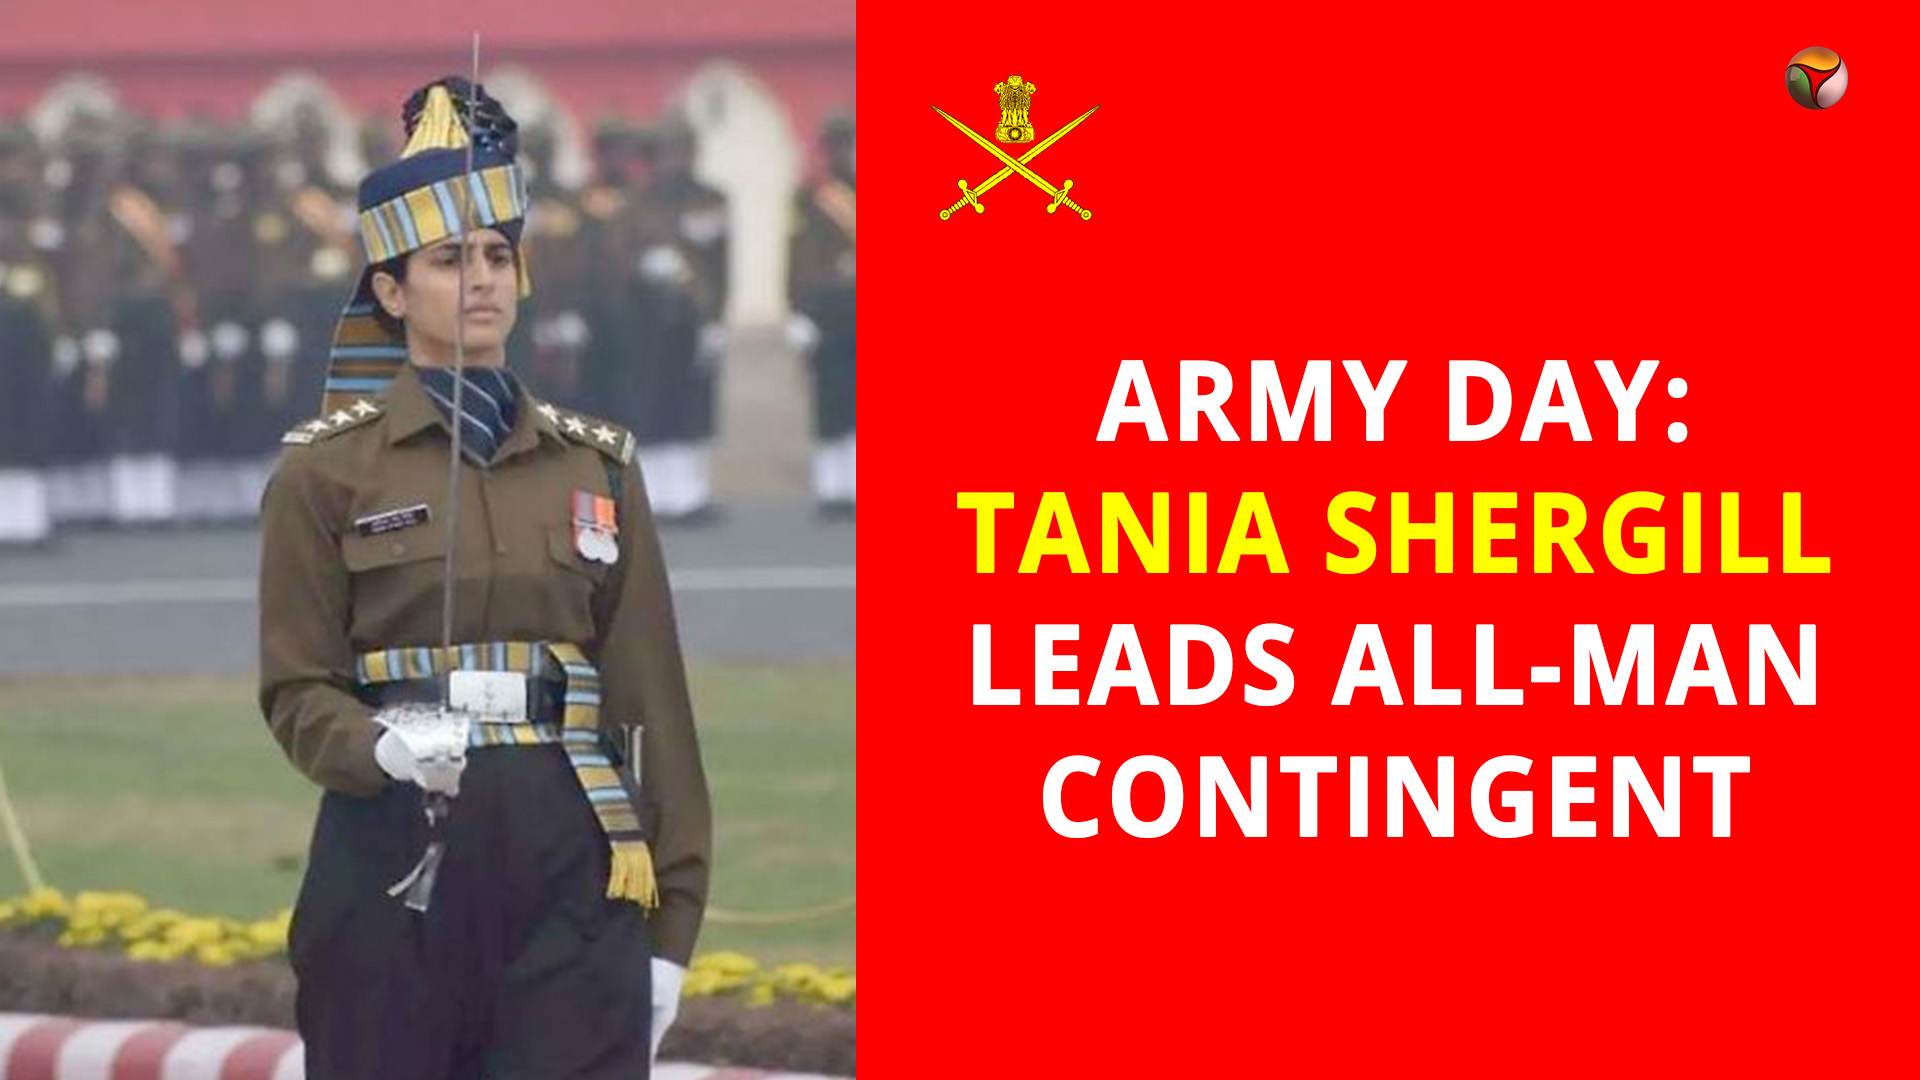 In a first, woman leads all-man contingent Army Day parade